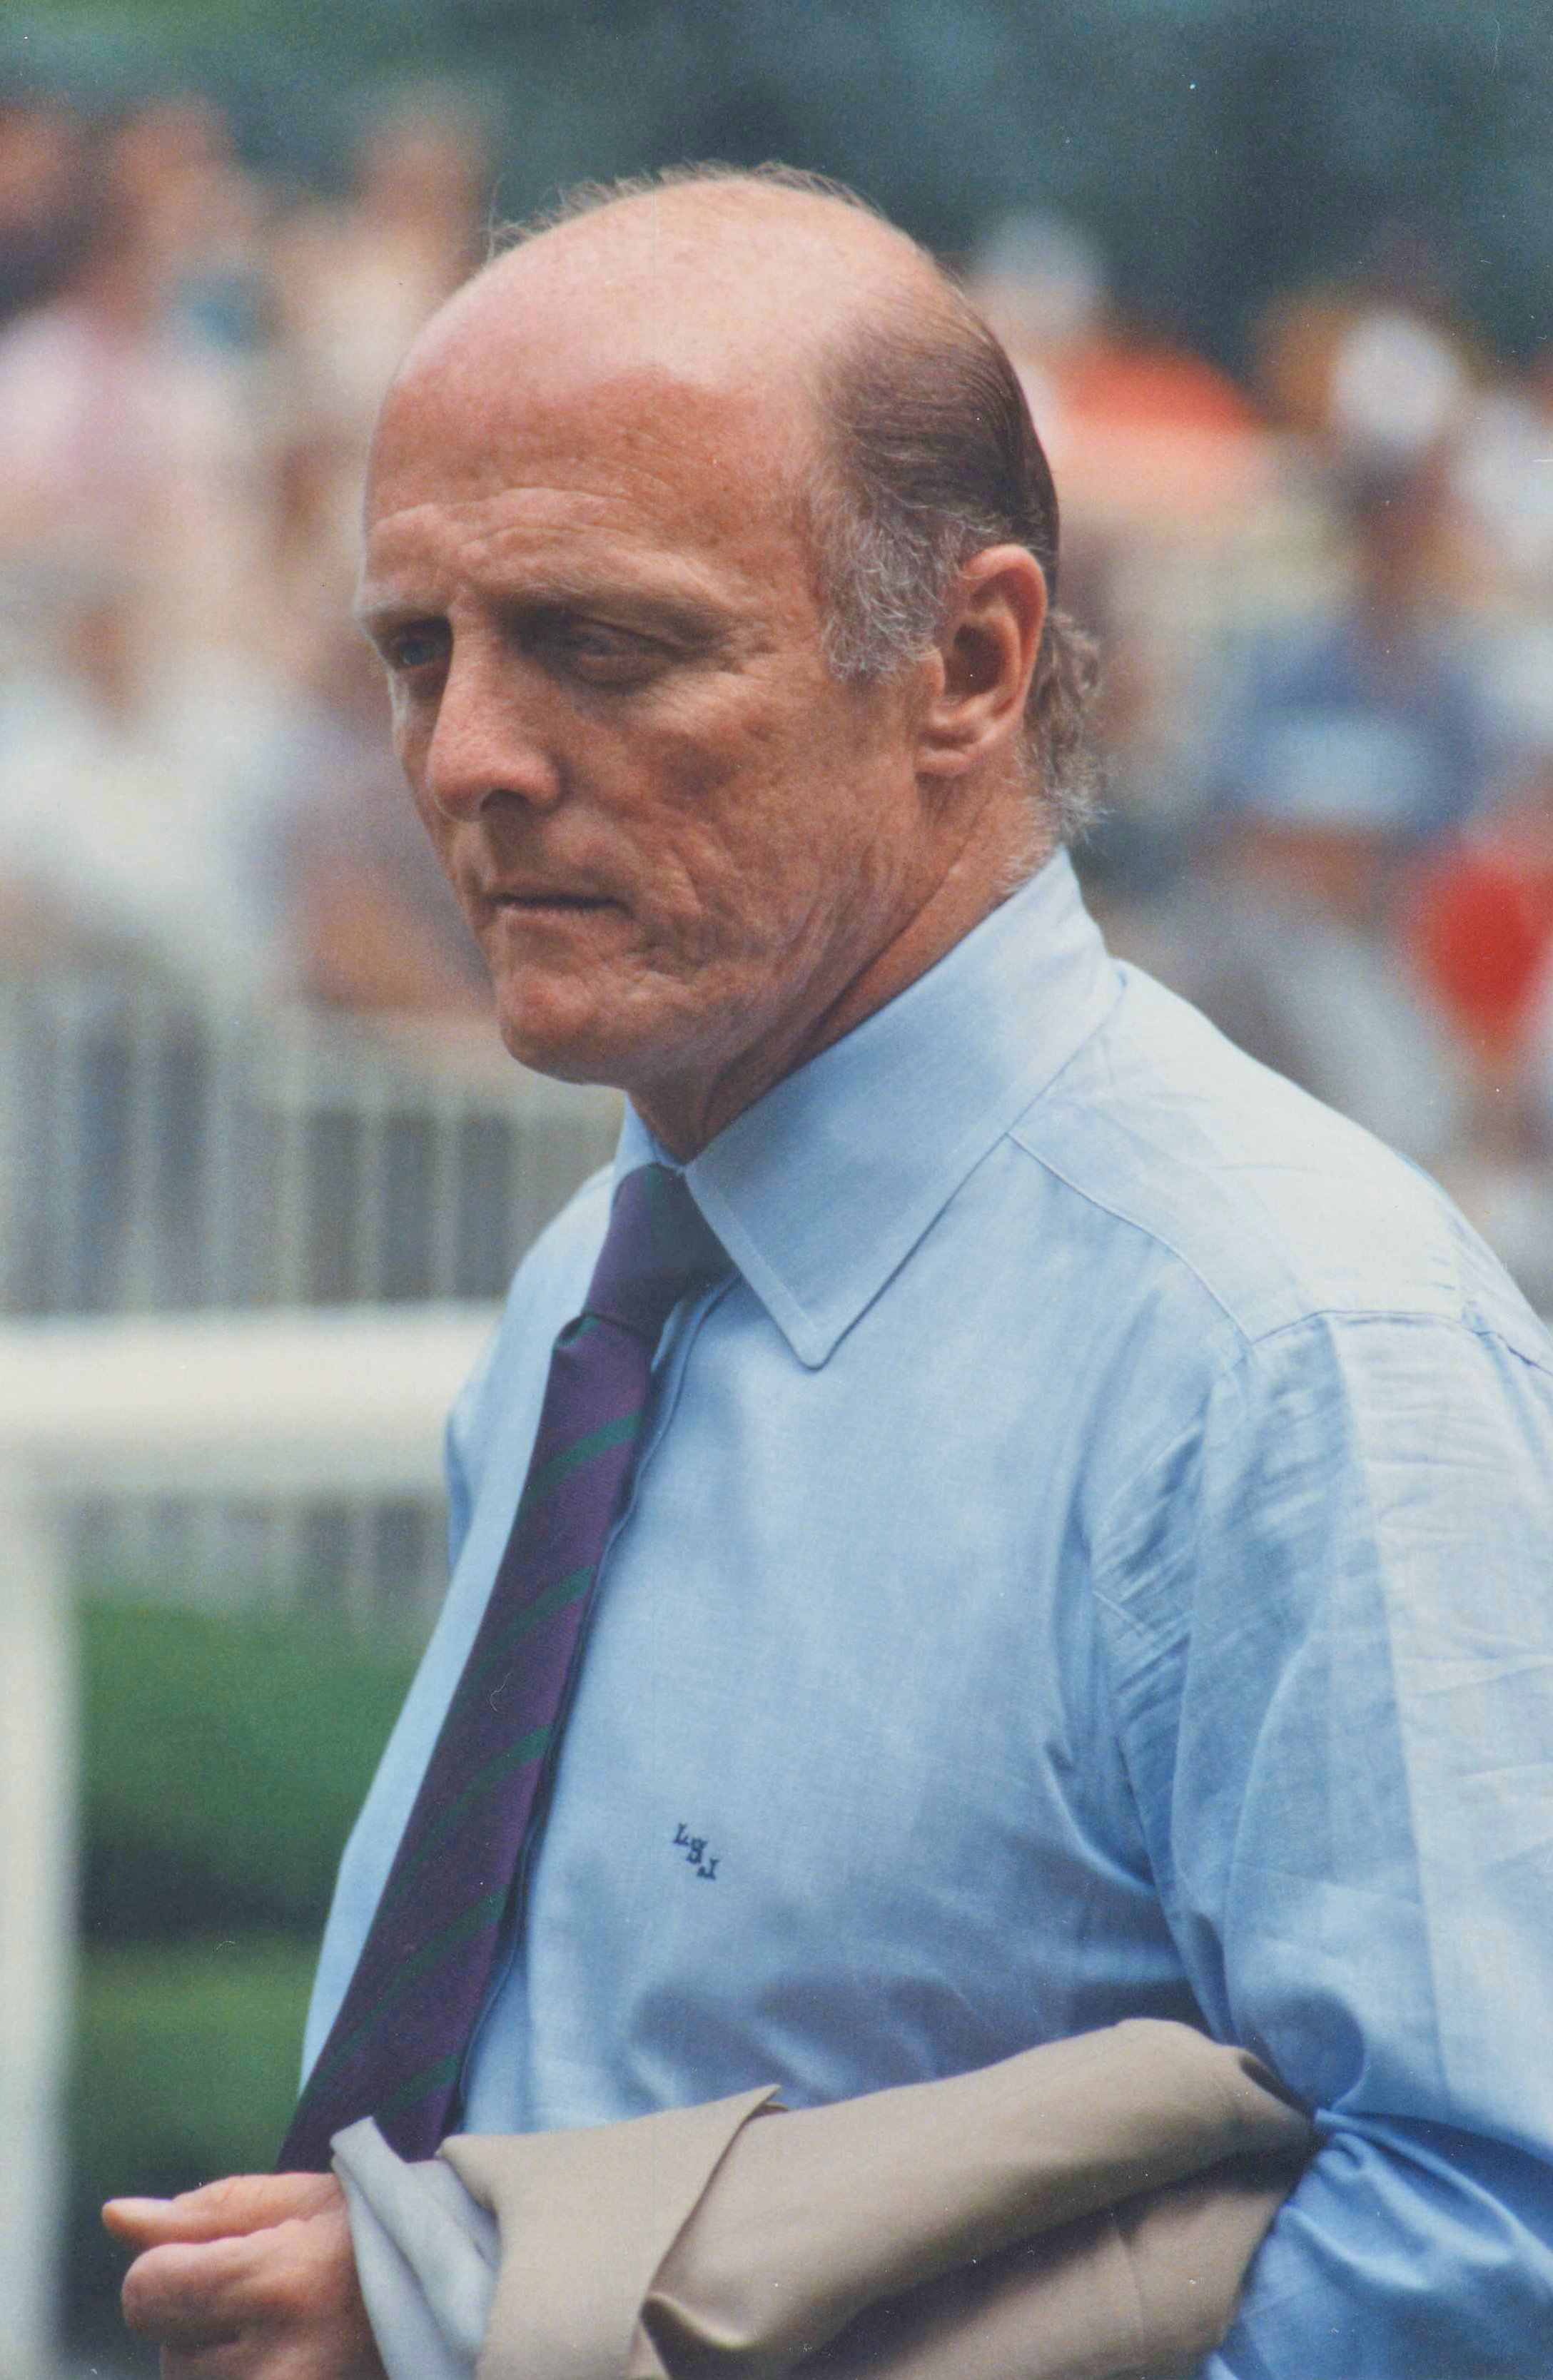 LeRoy Jolley at Belmont, 1990 (Barbara D. Livingston/Museum Collection)